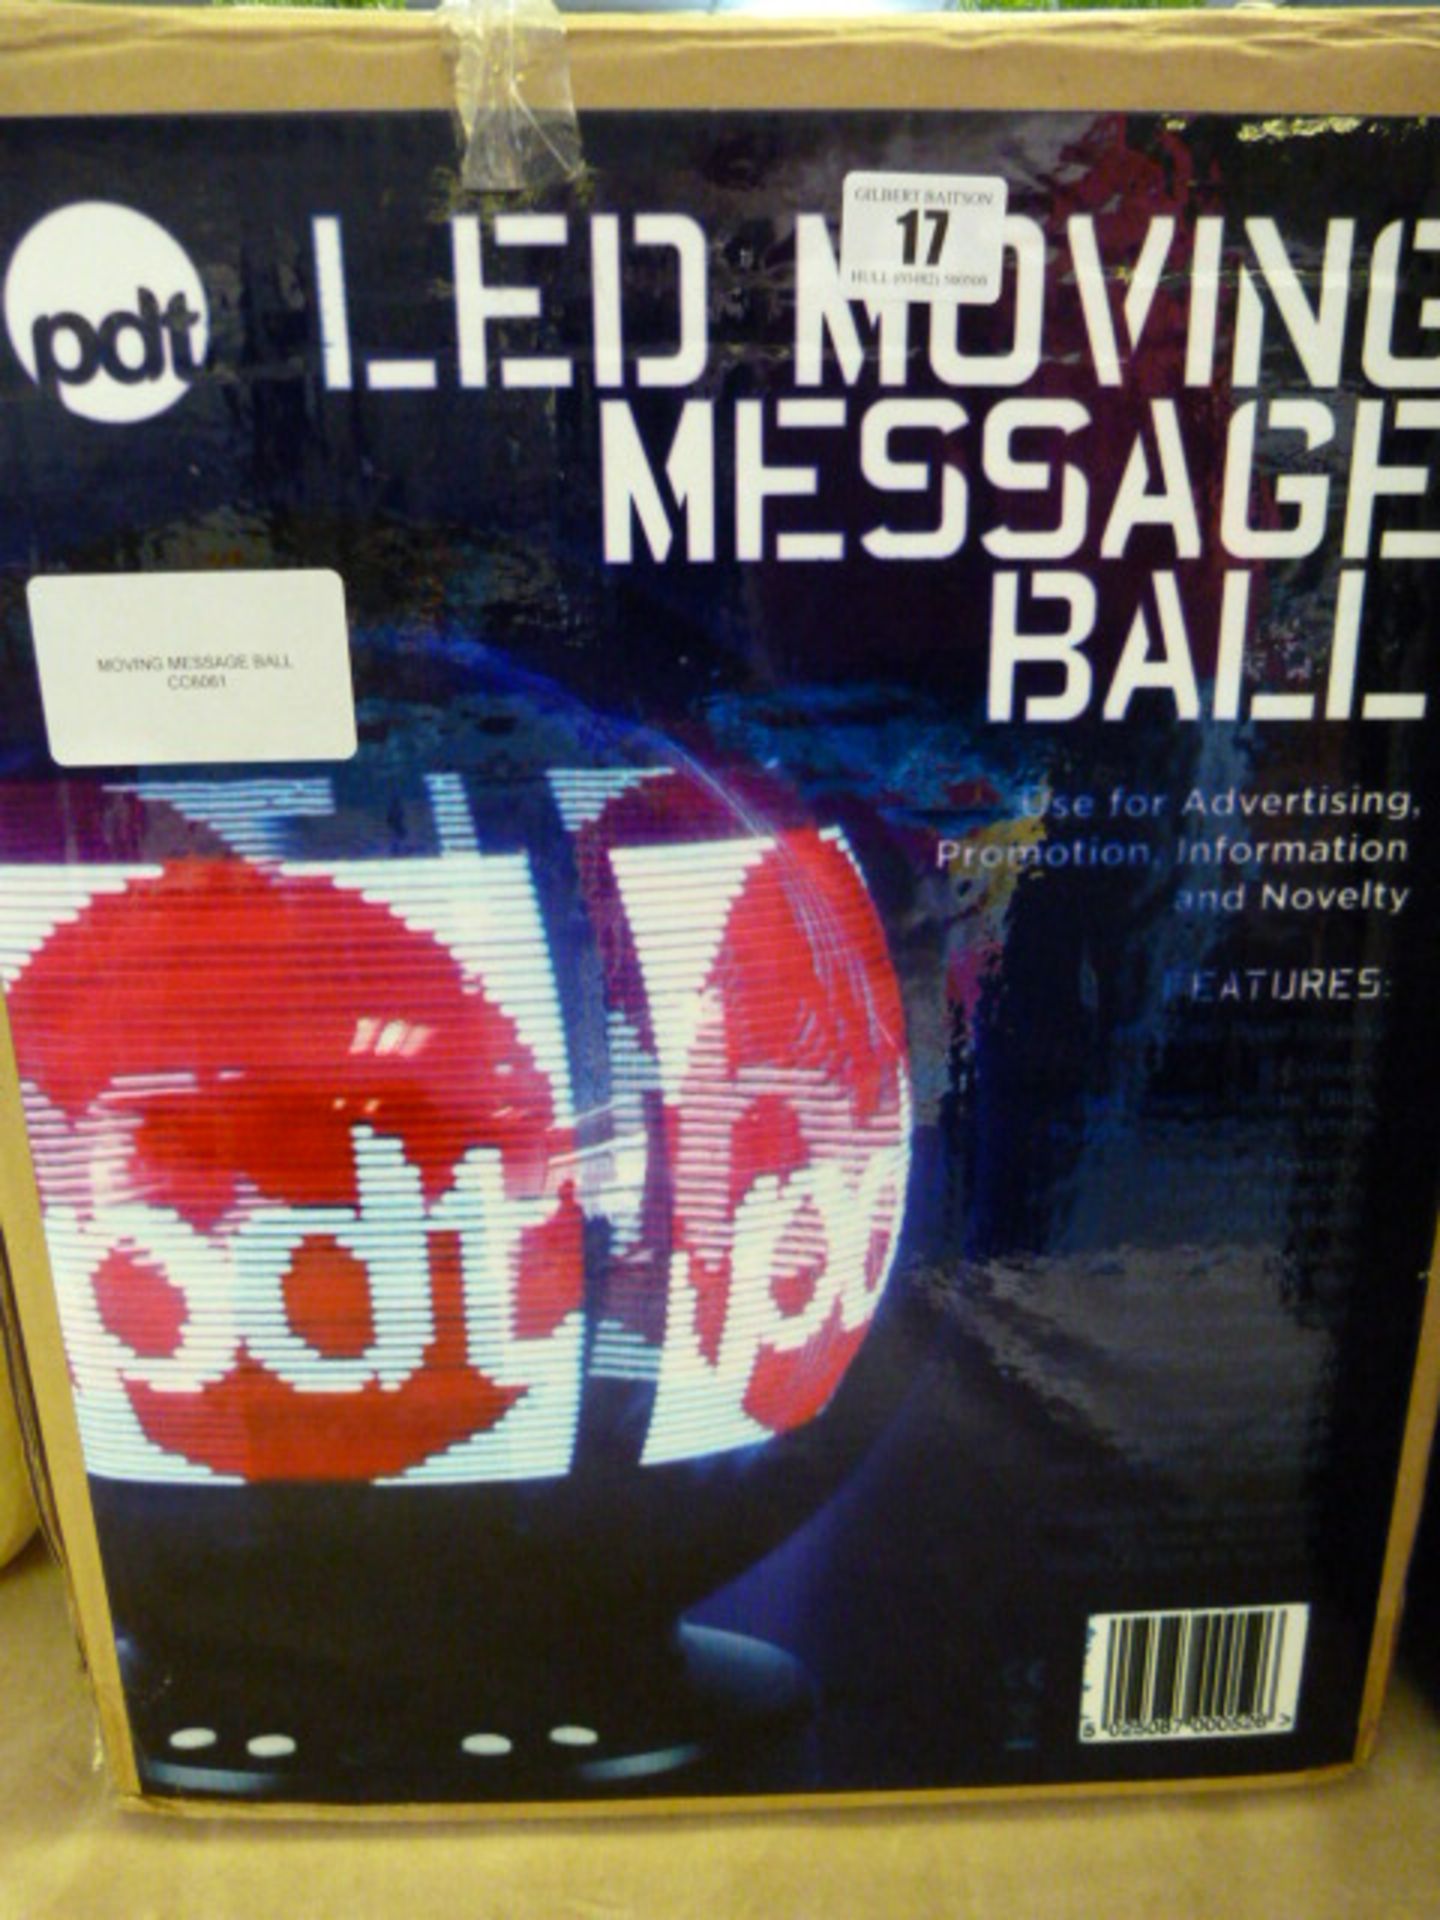 *MOVING MESSAGE BALL